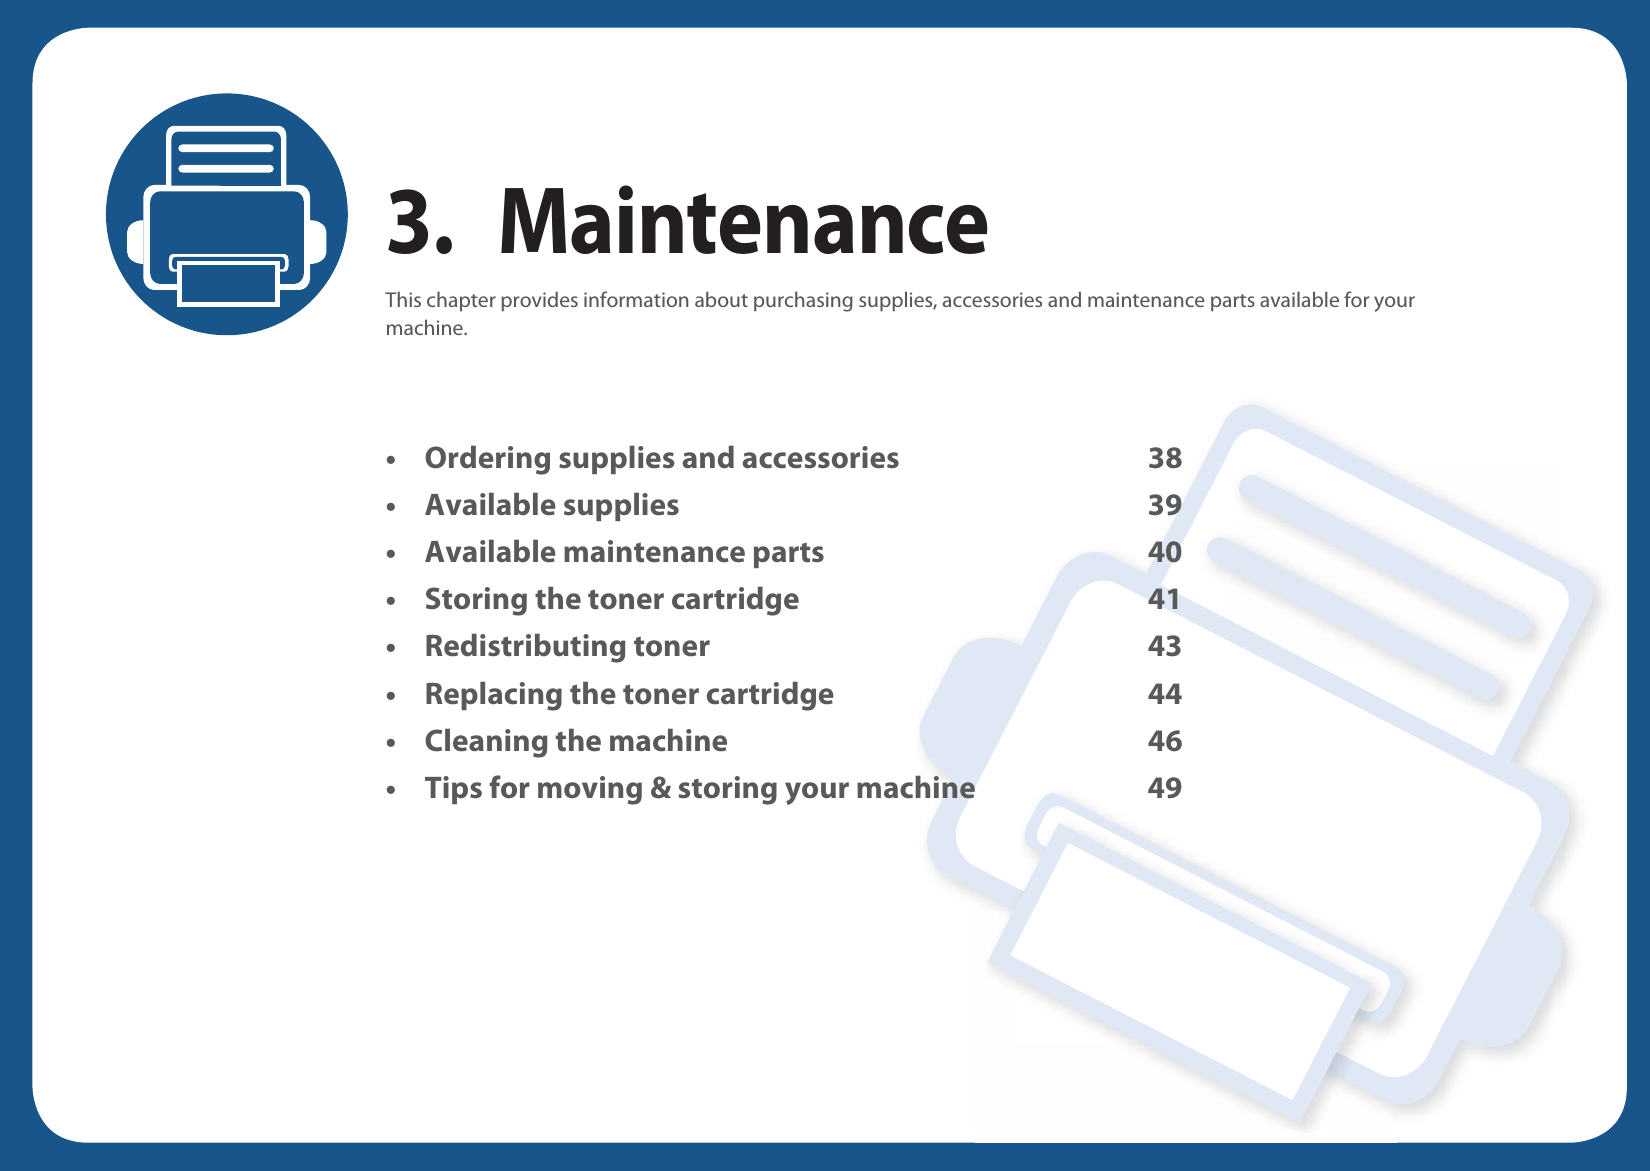 3. MaintenanceThis chapter provides information about purchasing supplies, accessories and maintenance parts available for your machine.• Ordering supplies and accessories 38• Available supplies 39• Available maintenance parts 40• Storing the toner cartridge 41• Redistributing toner 43• Replacing the toner cartridge 44• Cleaning the machine 46• Tips for moving &amp; storing your machine 49